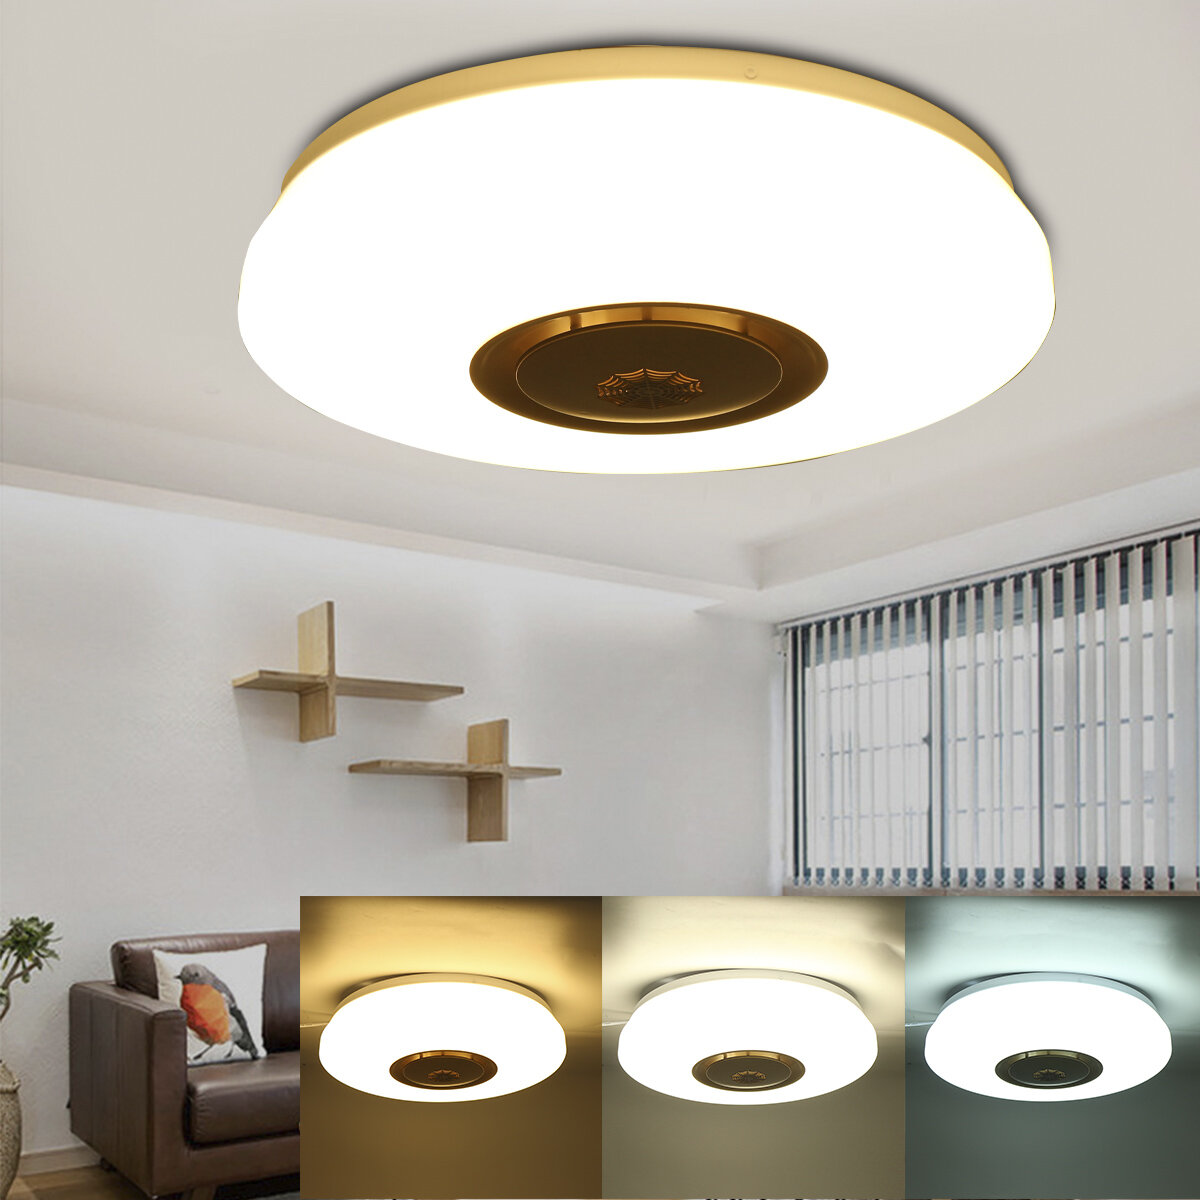 Image of LED Ceiling Lamp Dimmable APP Control 85-265V Smoke Alarm Modern Minimalist Acrylic Round Lighting Living Room Lamp Bedr